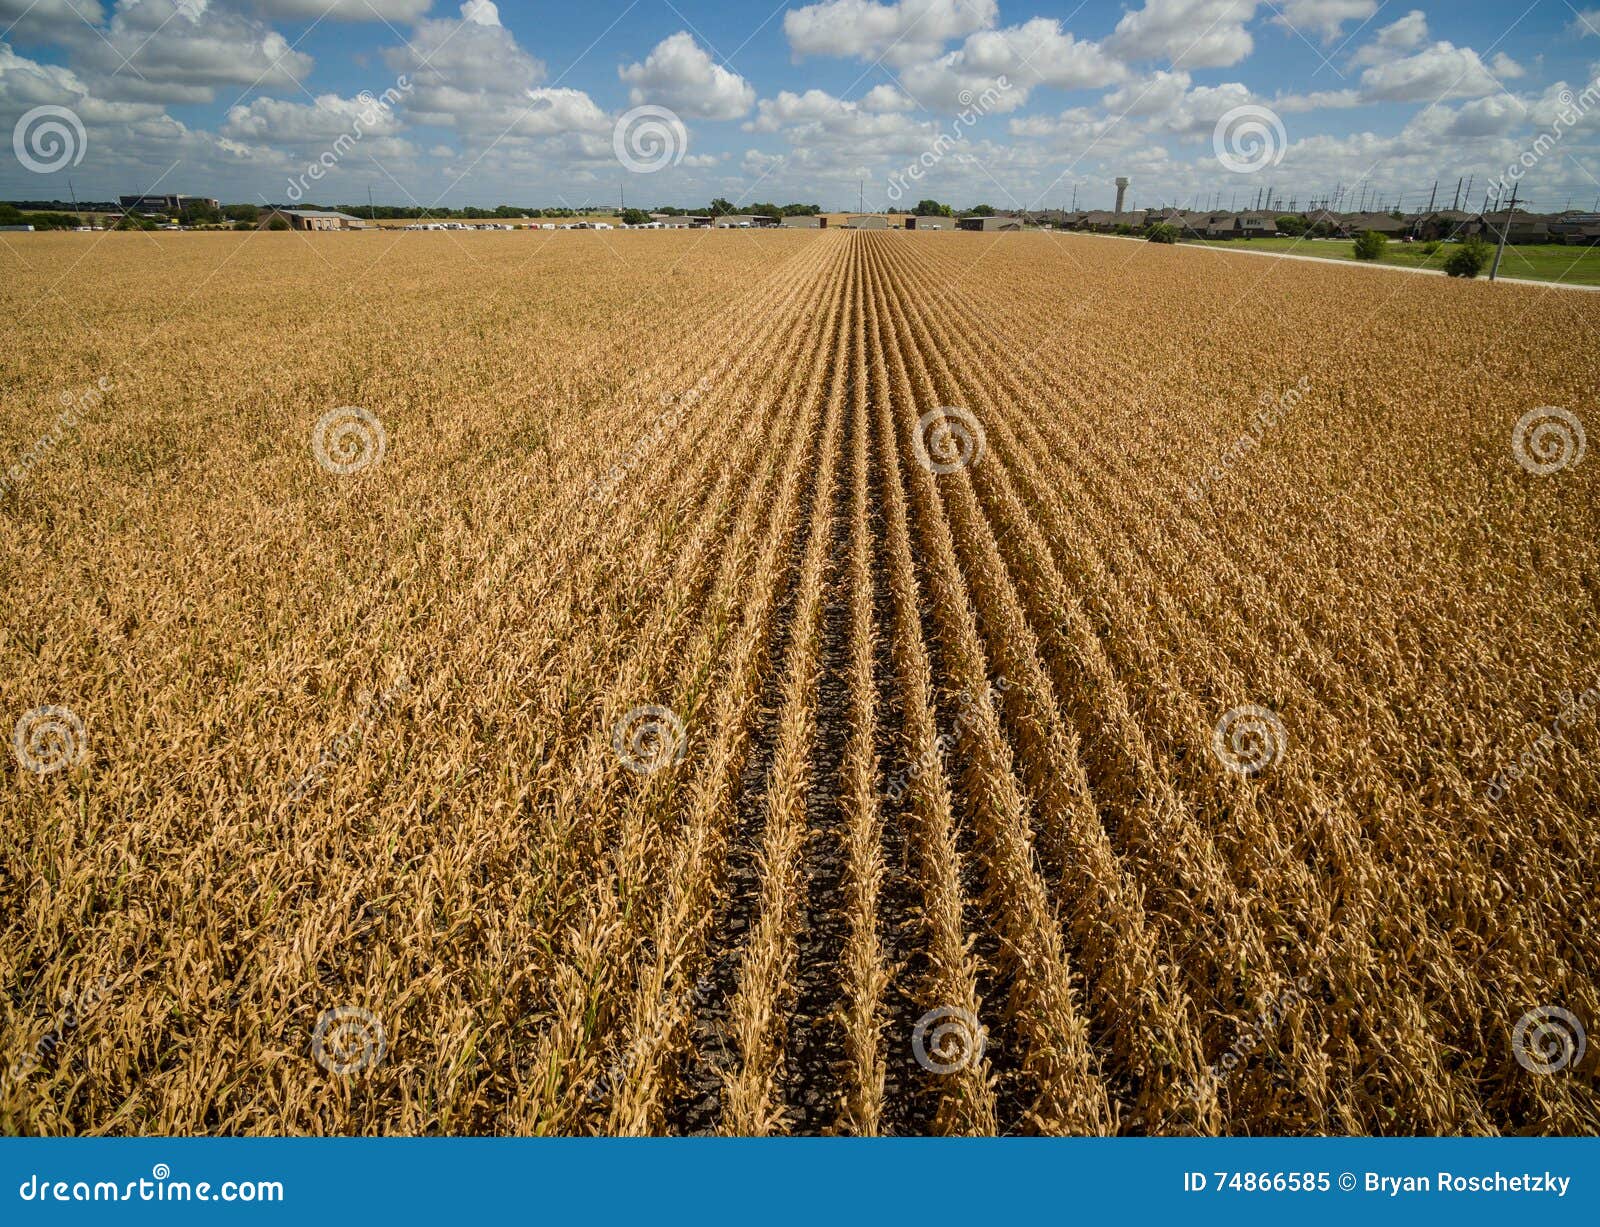 aerial drone view above corn crops long rows of corn dry drought climate change